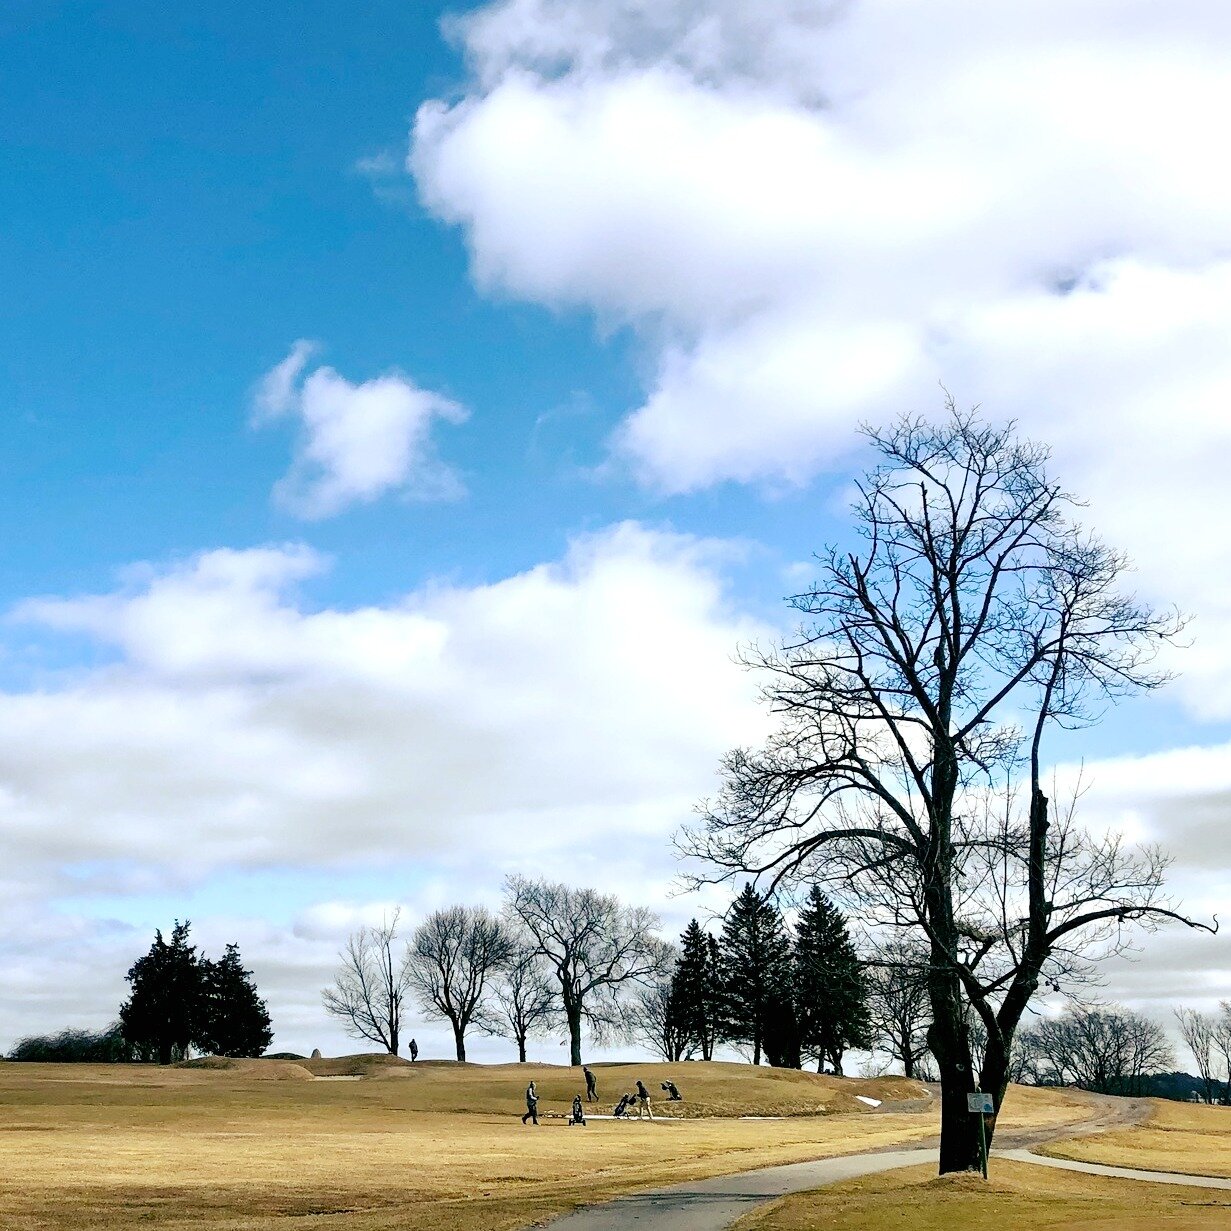 The end-of-winter GOLF game GOES ON as weather permits from sun up till sunset at Cape Ann Golf Club! Players walk the course at this time of year with carts parked until spring. All Tee Time Reservations are made on line at capeanngolf.com - Come jo